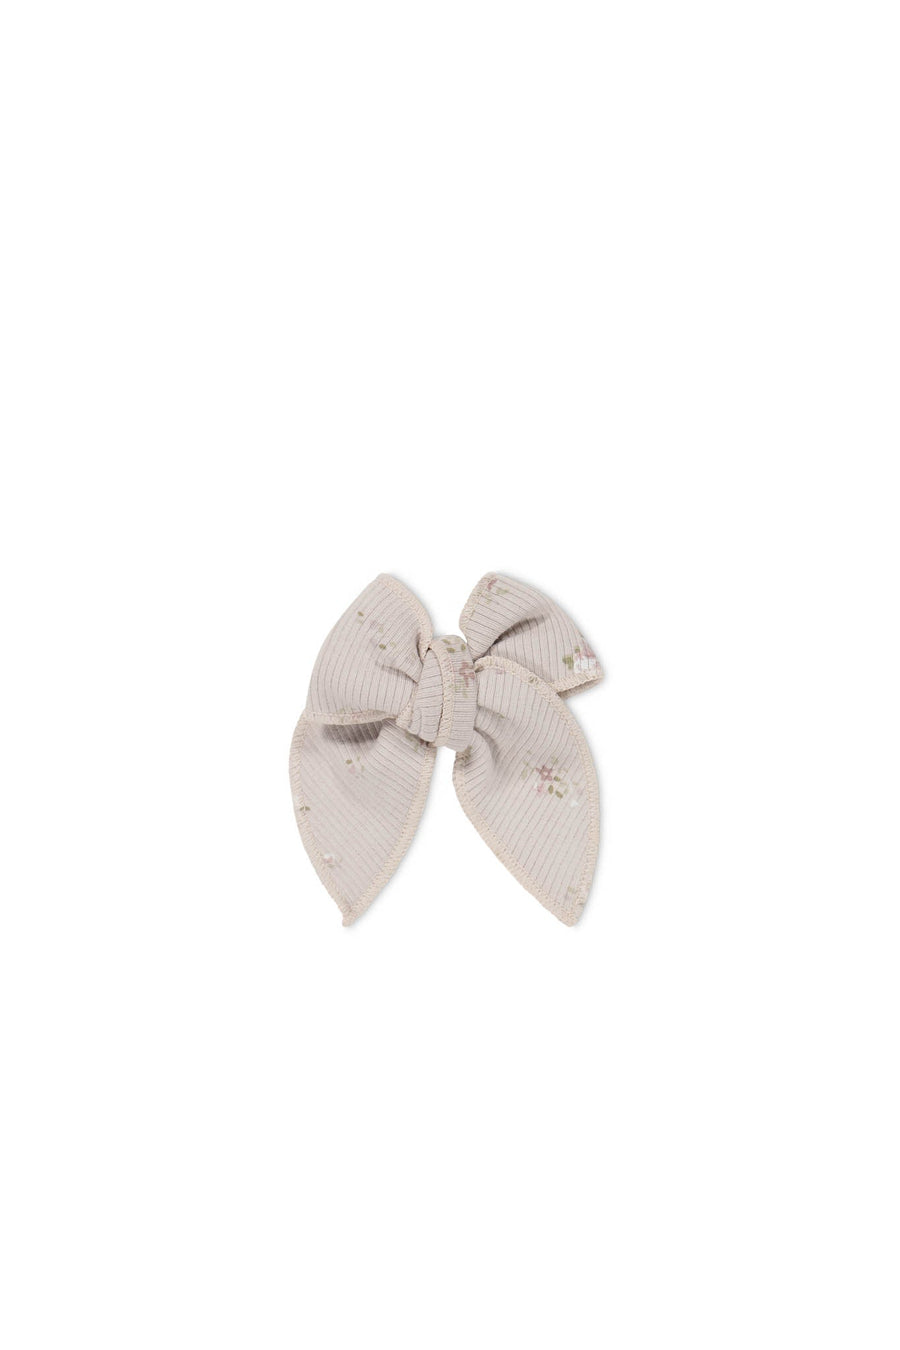 Organic Cotton Fine Rib Noelle Bow - Petite Fleur Violet Childrens Bow from Jamie Kay USA